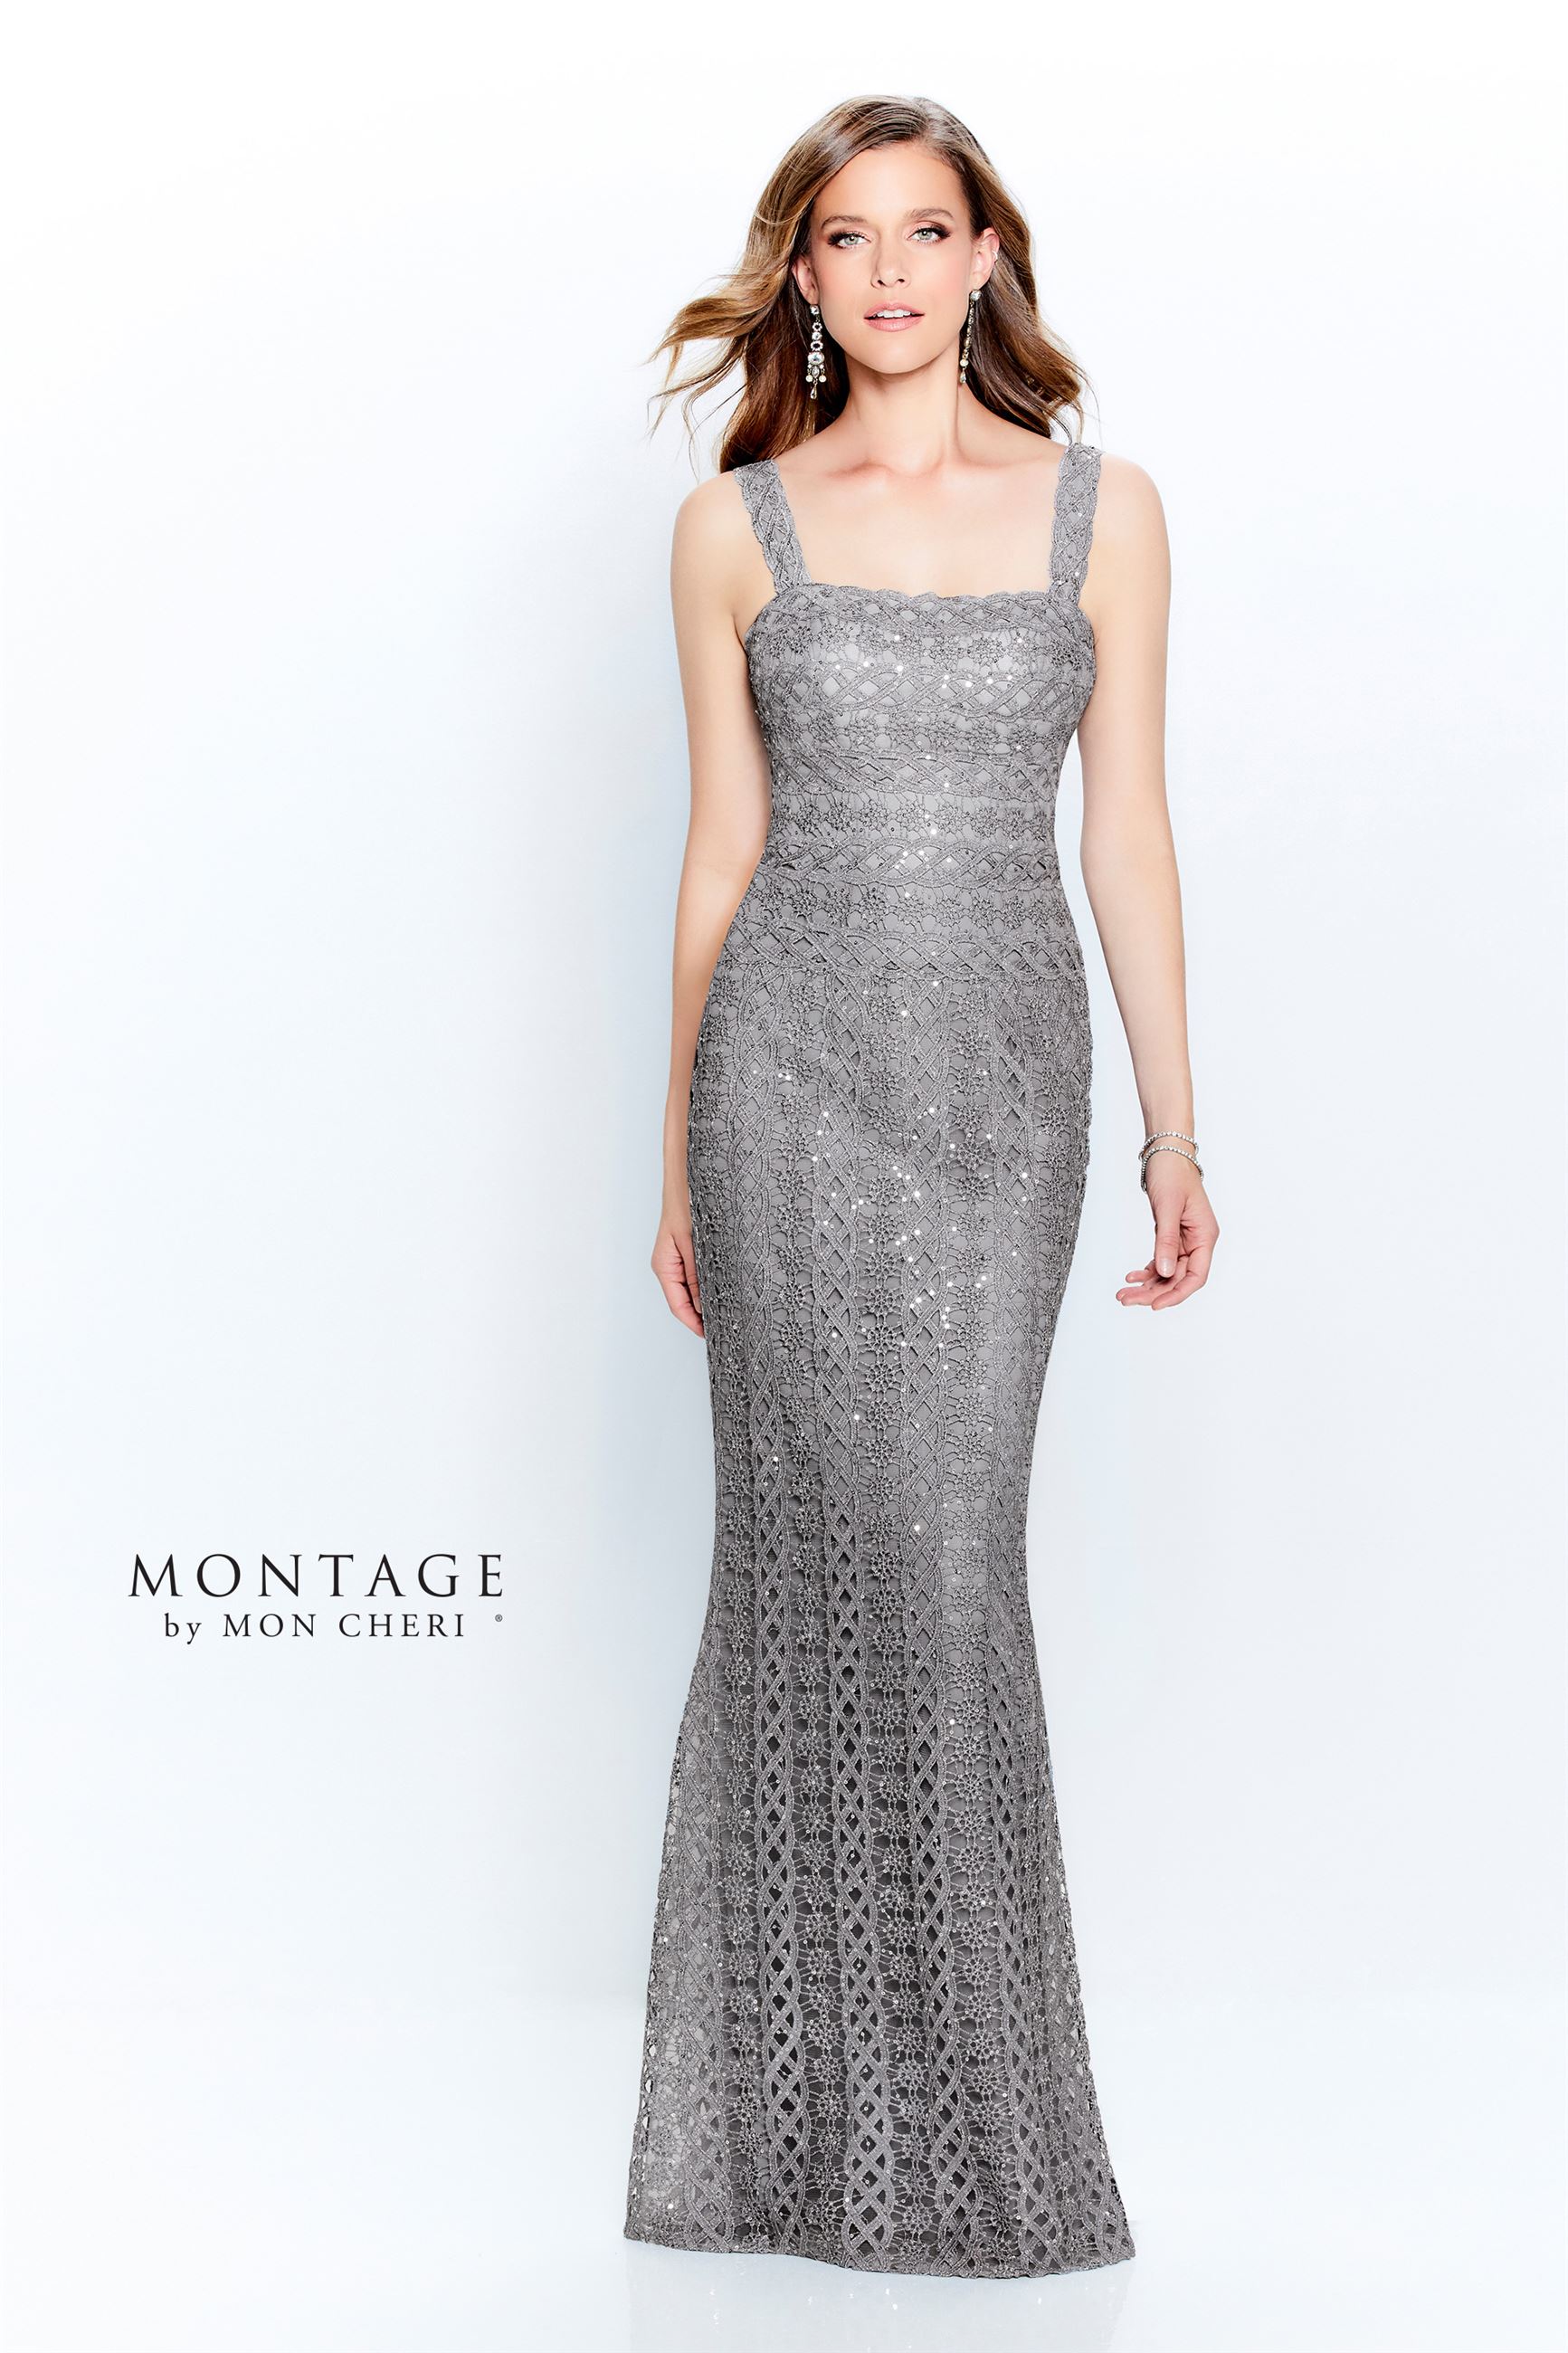 Mother of the Bride Dresses by Montage, Mon Cheri, Special Occasion  Formal Wear for the Modern Mother - 120916